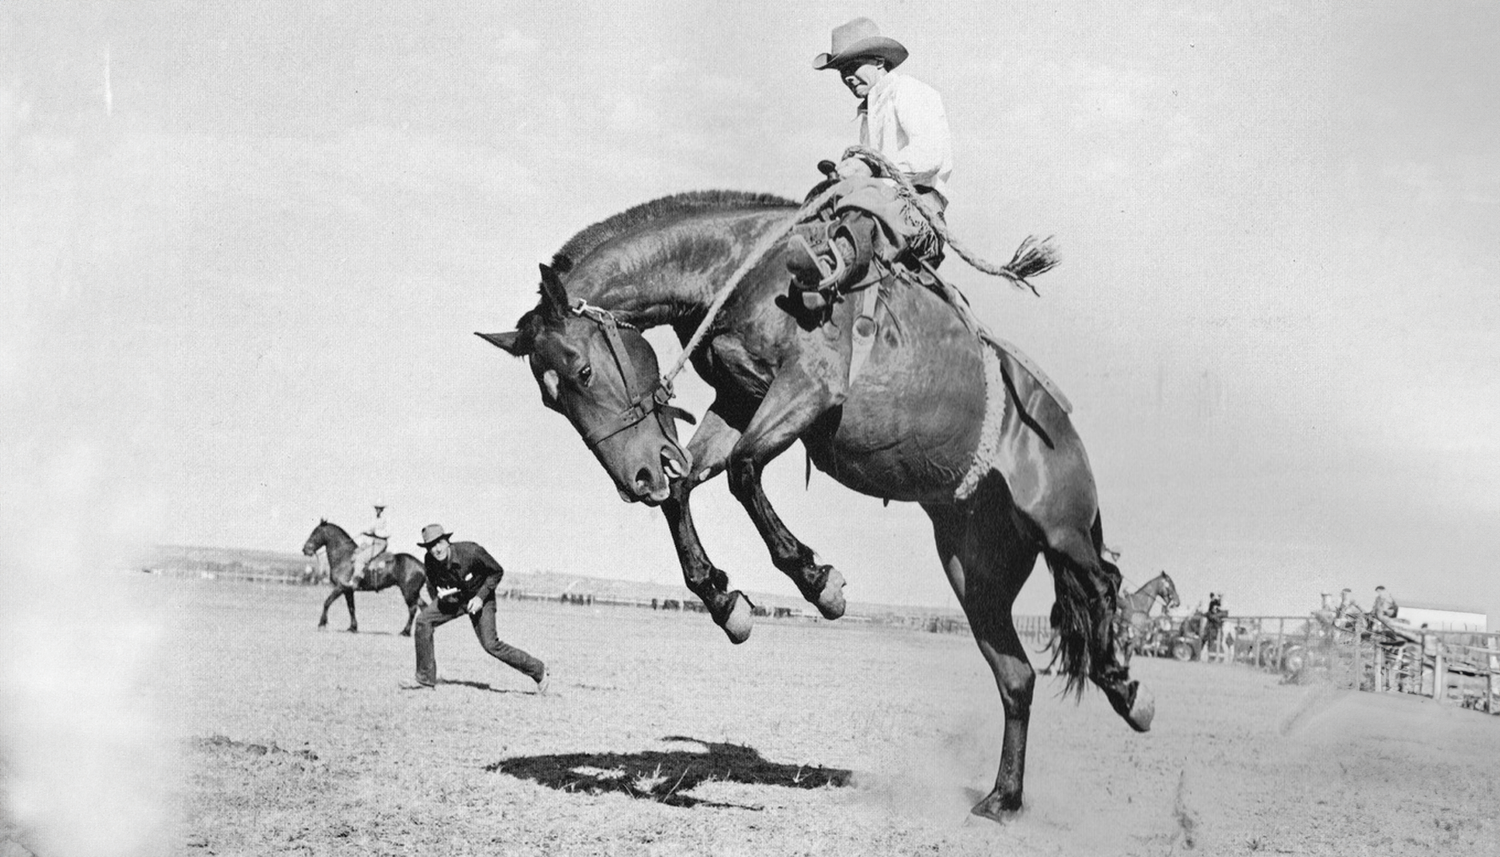 Riding Through Time The Stirring History of Rodeo